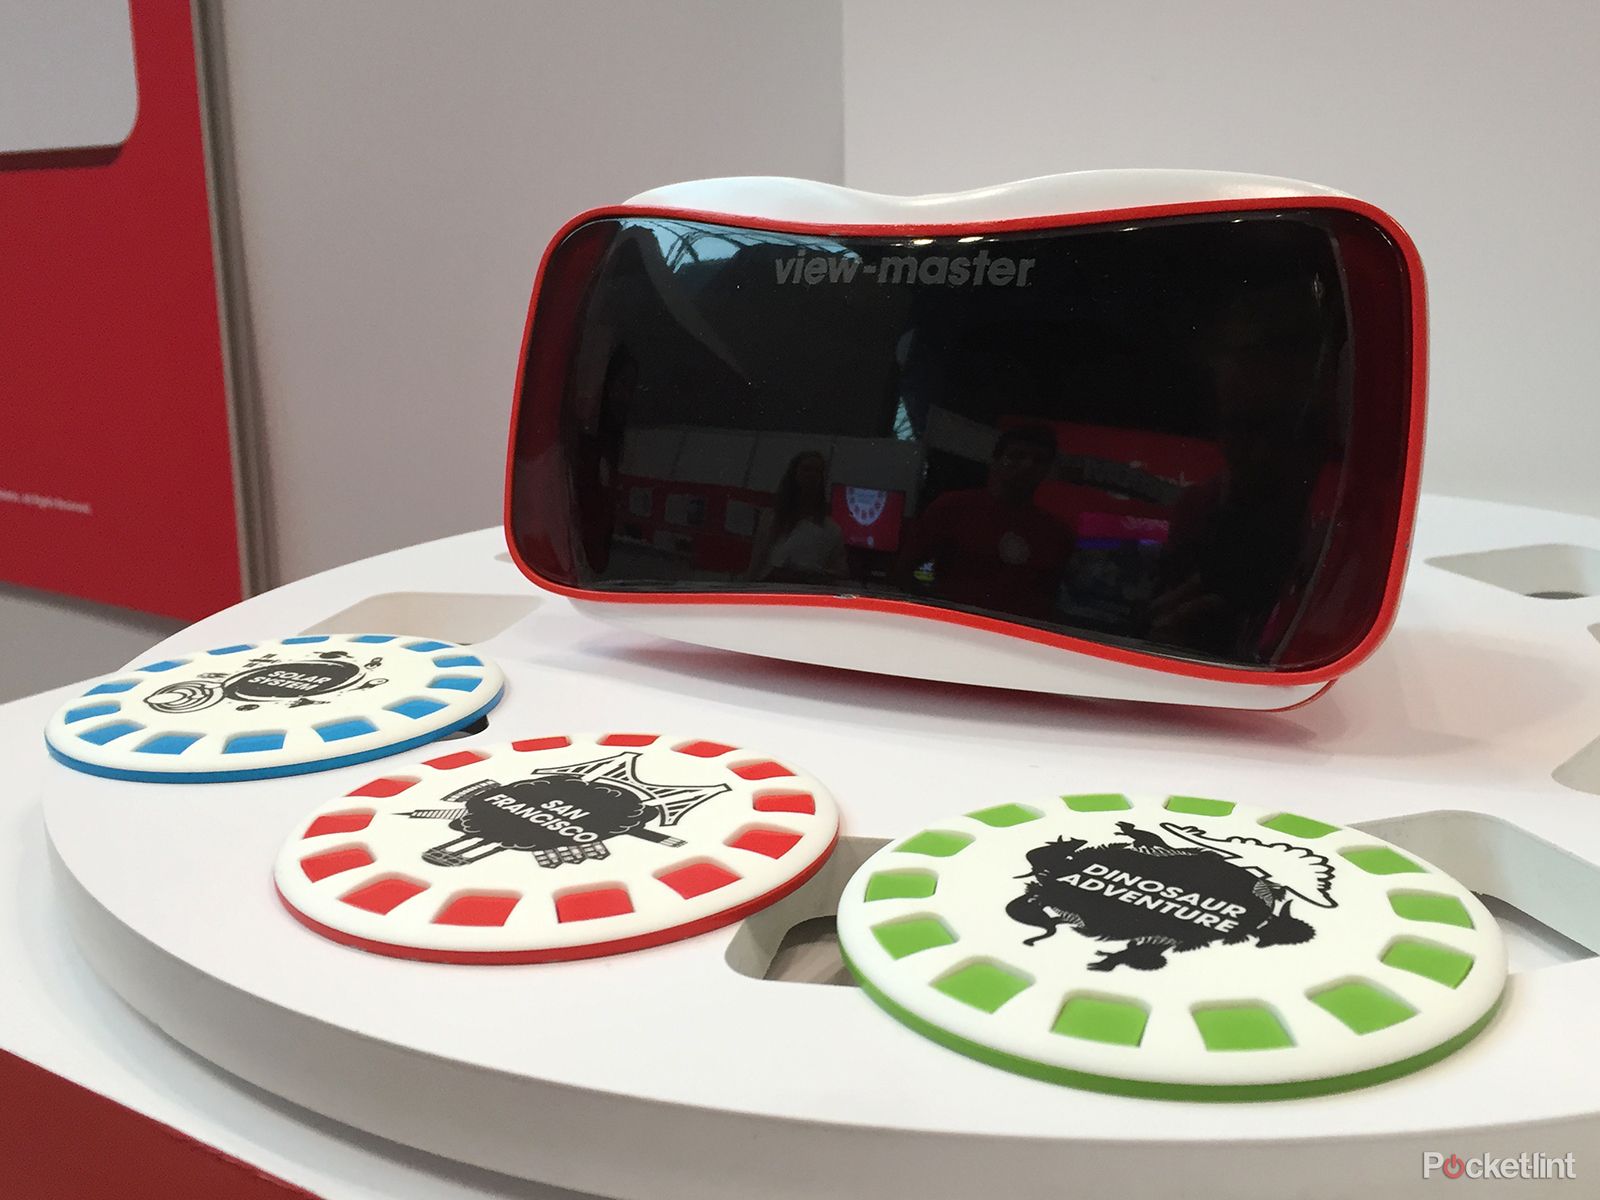 view master hands on the vr reimagining of a 50s classic image 1